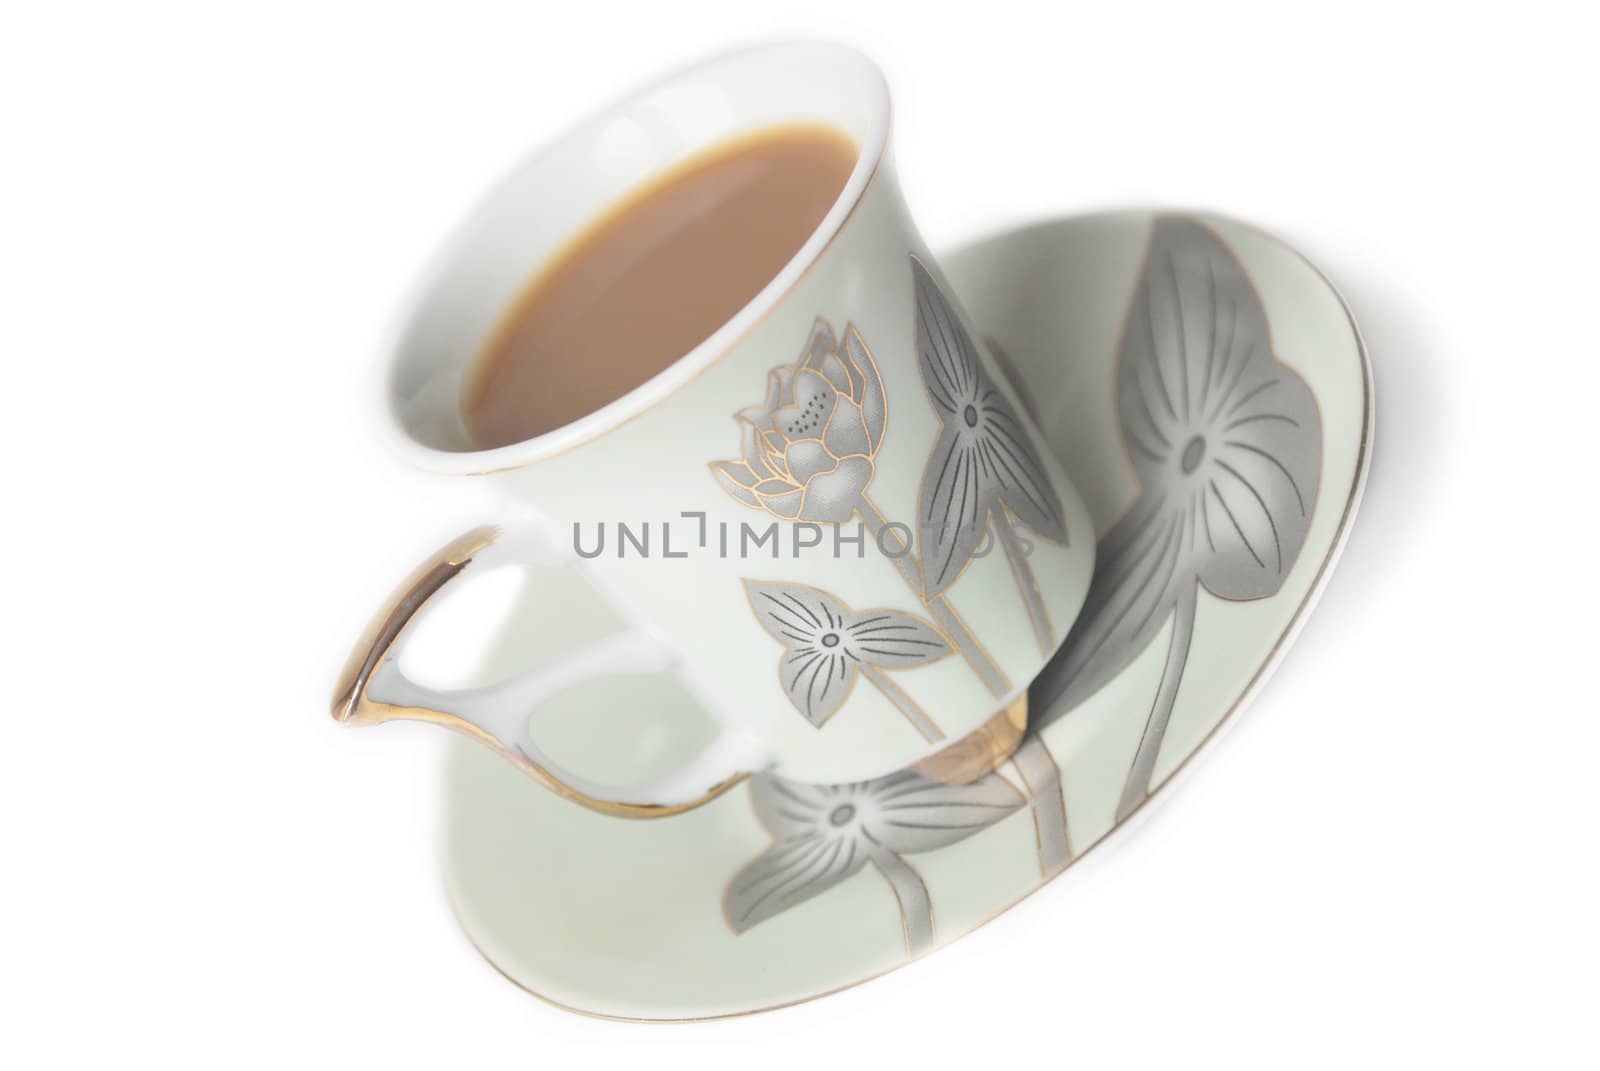 cup of coffee with milk or cream and saucer  by svtrotof